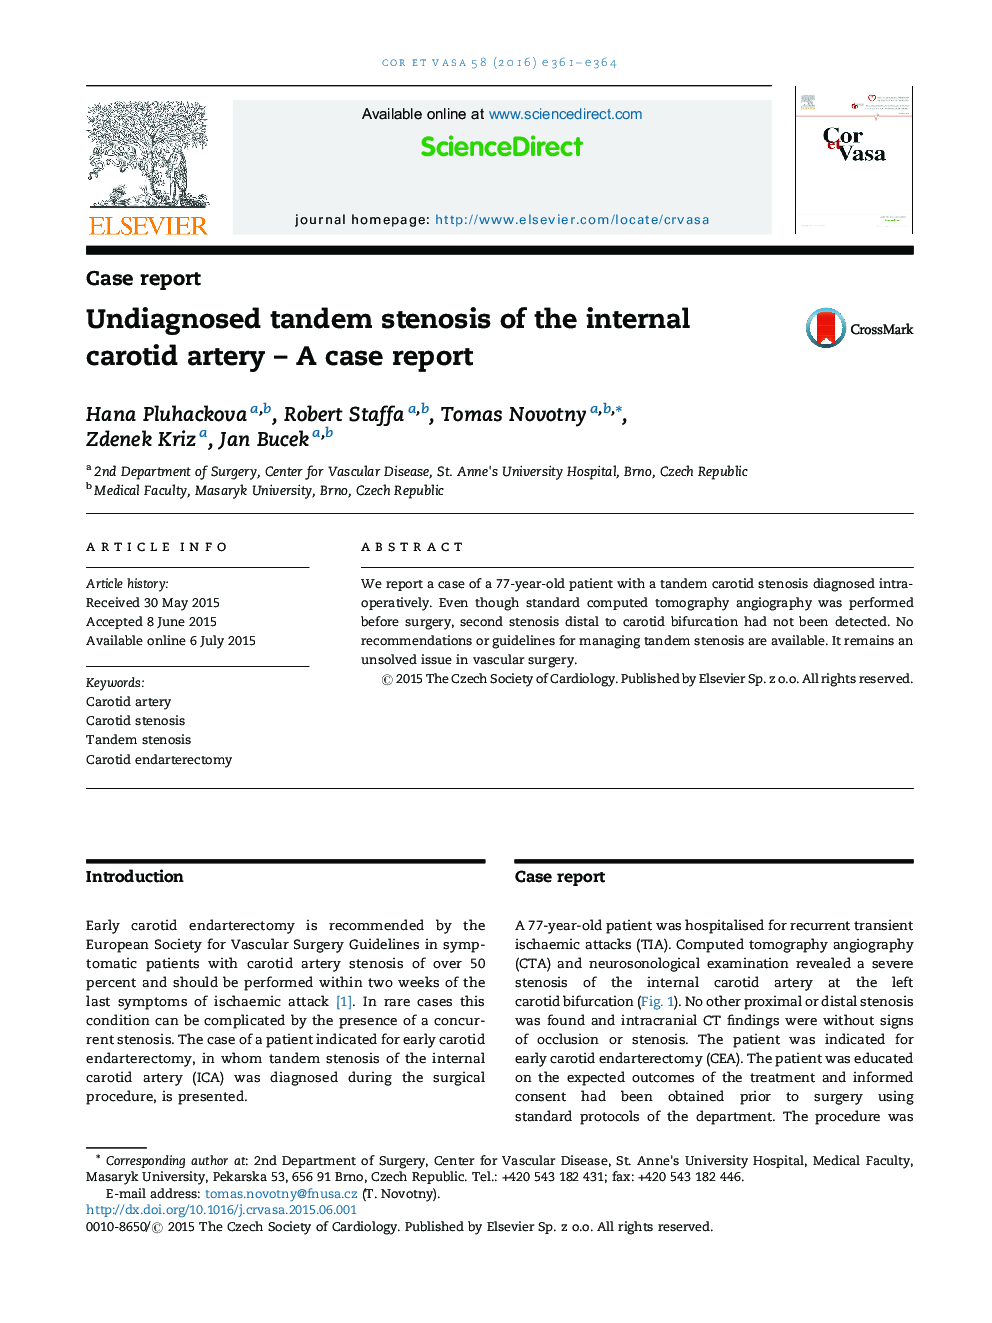 Undiagnosed tandem stenosis of the internal carotid artery – A case report